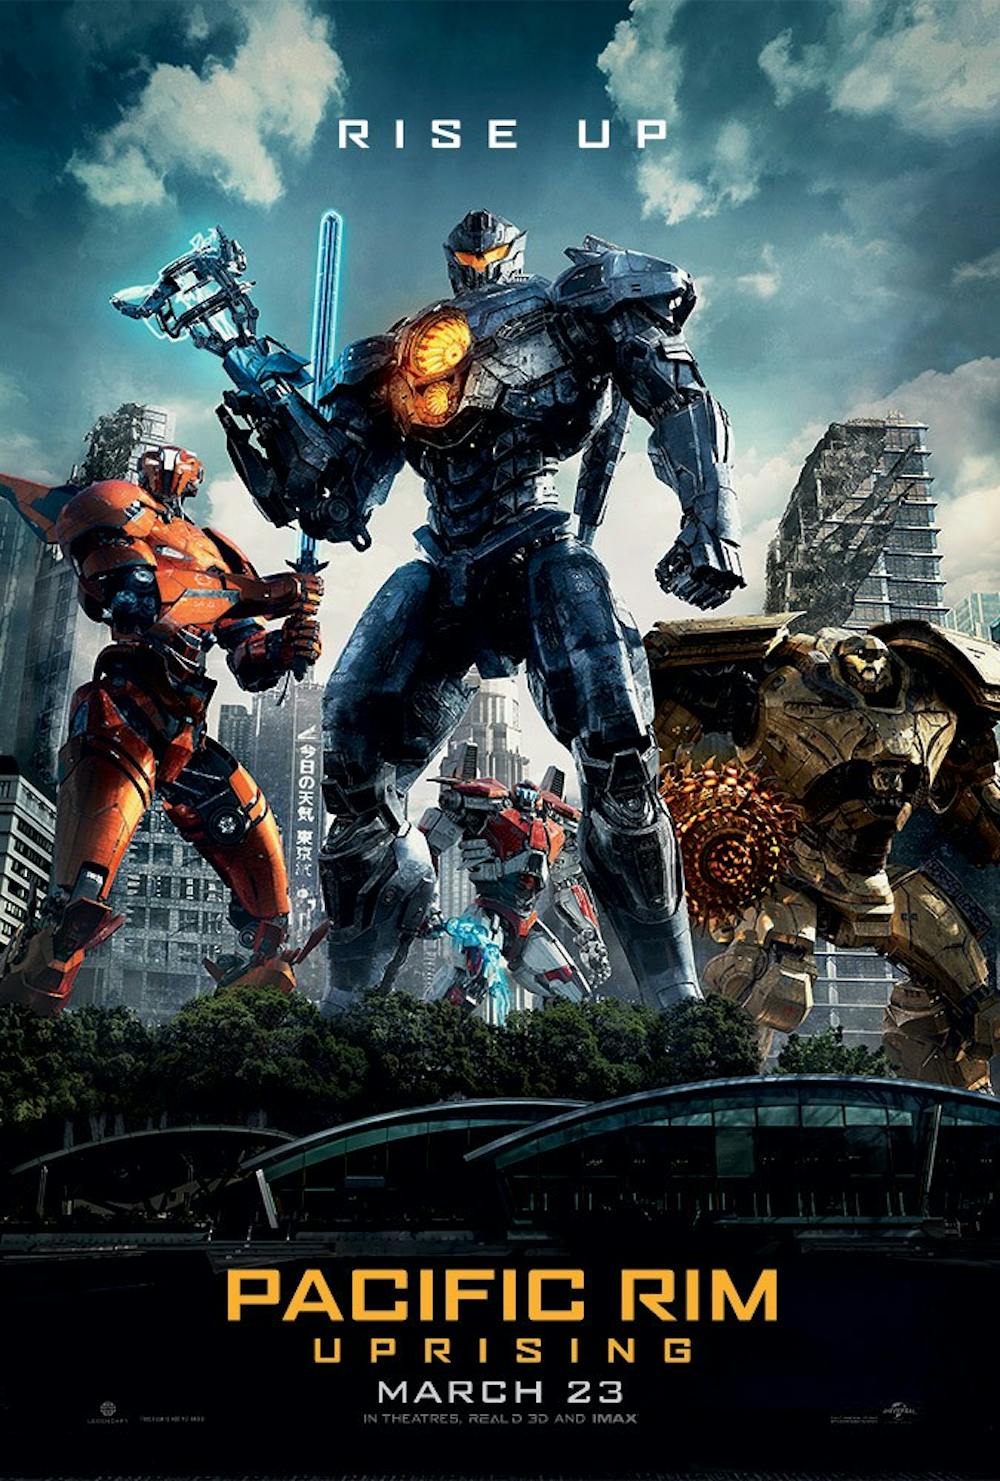 <p>“Pacific Rim Uprising” rarely takes advantage of its clearer frame though and is often reminiscent of action scenes from other sci-fi action films simply scaled upwards.</p>